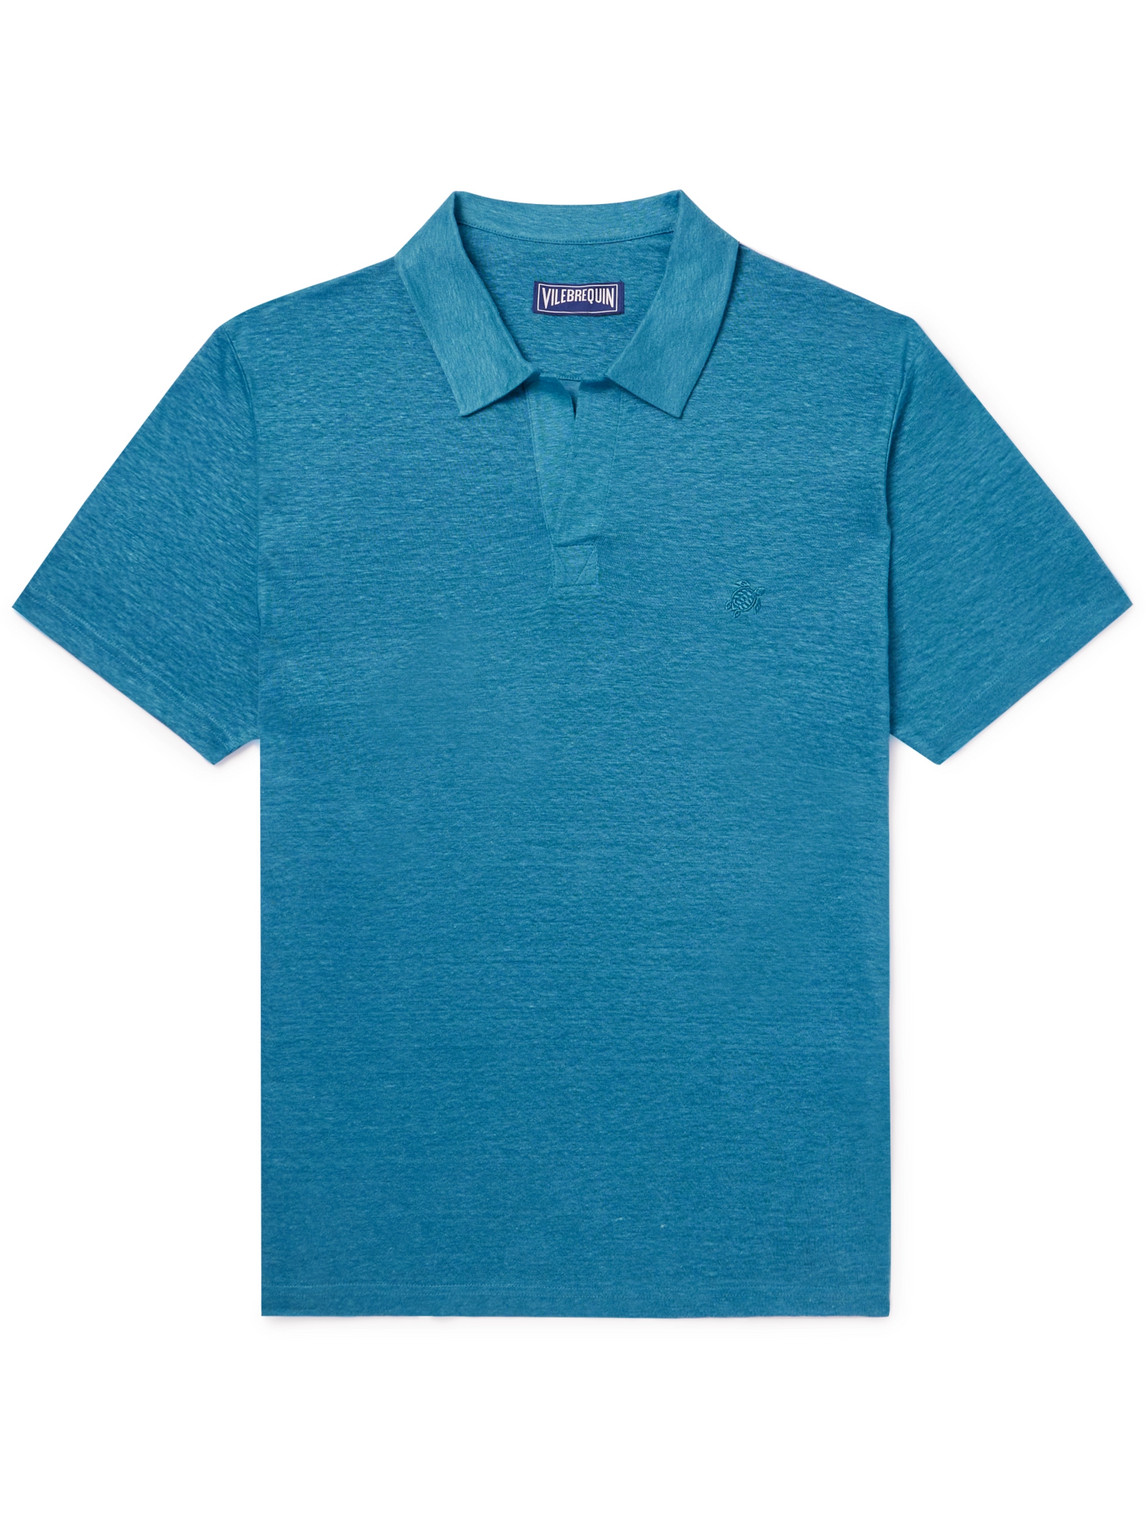 Vilebrequin Pyramid Linen-jersey Polo Shirt In Blue